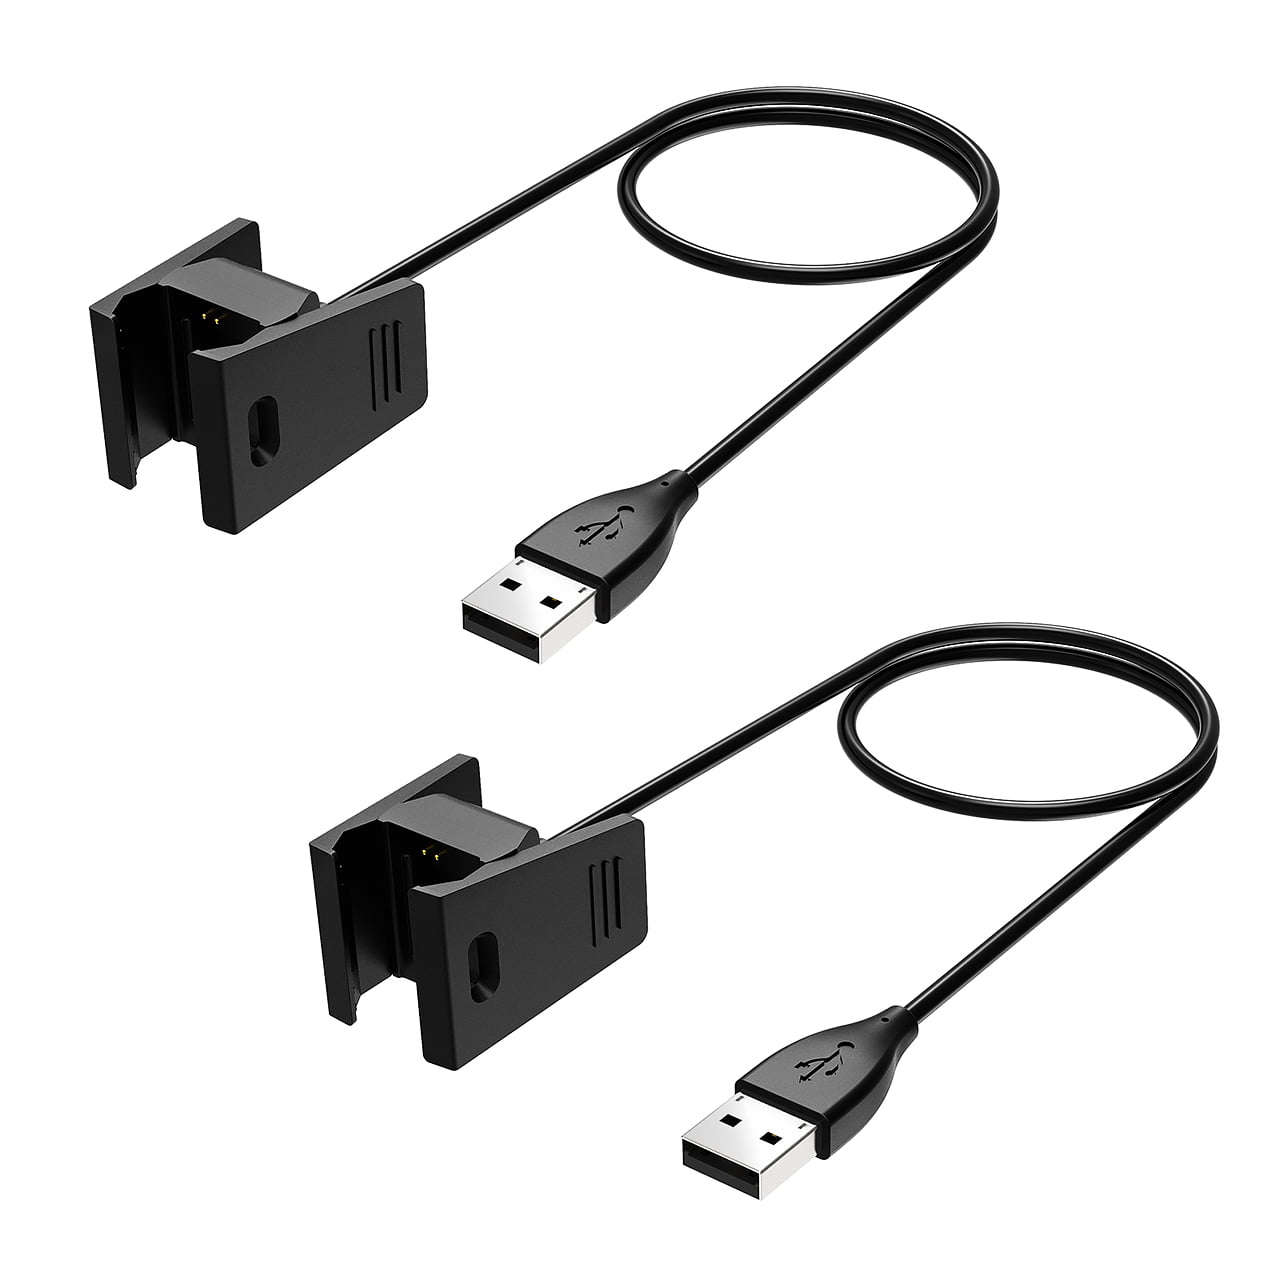 Fitbit Charge 2 HR Charger 21 Inch Replacement USB Charging Cables for sale online 